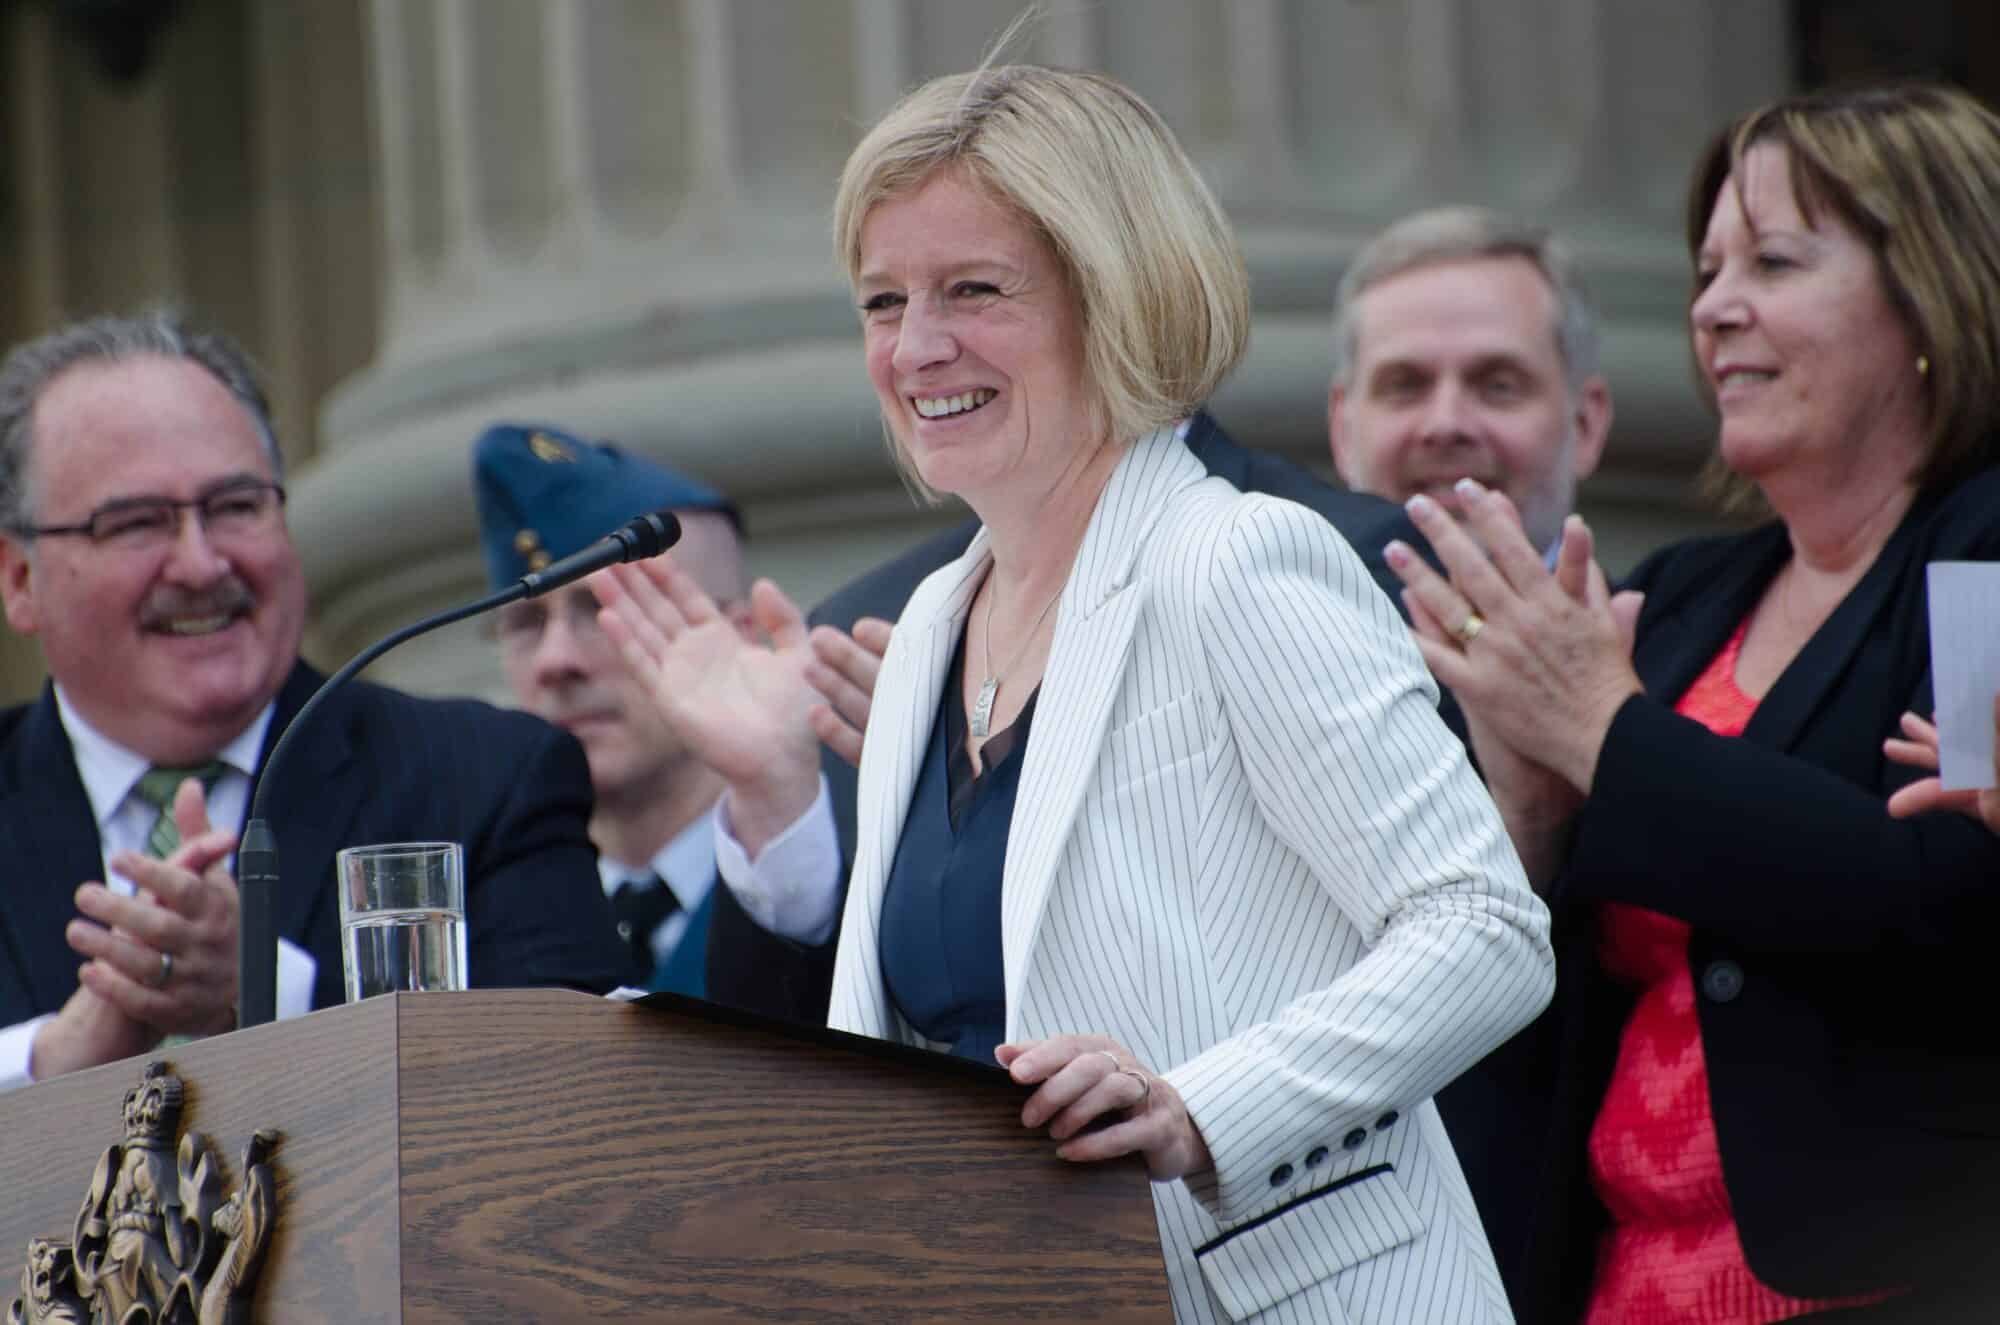 Rachel Notley after being sworn in as the 17th Premier of Alberta alongside her cabinet on the steps of the Alberta Legislature Building.